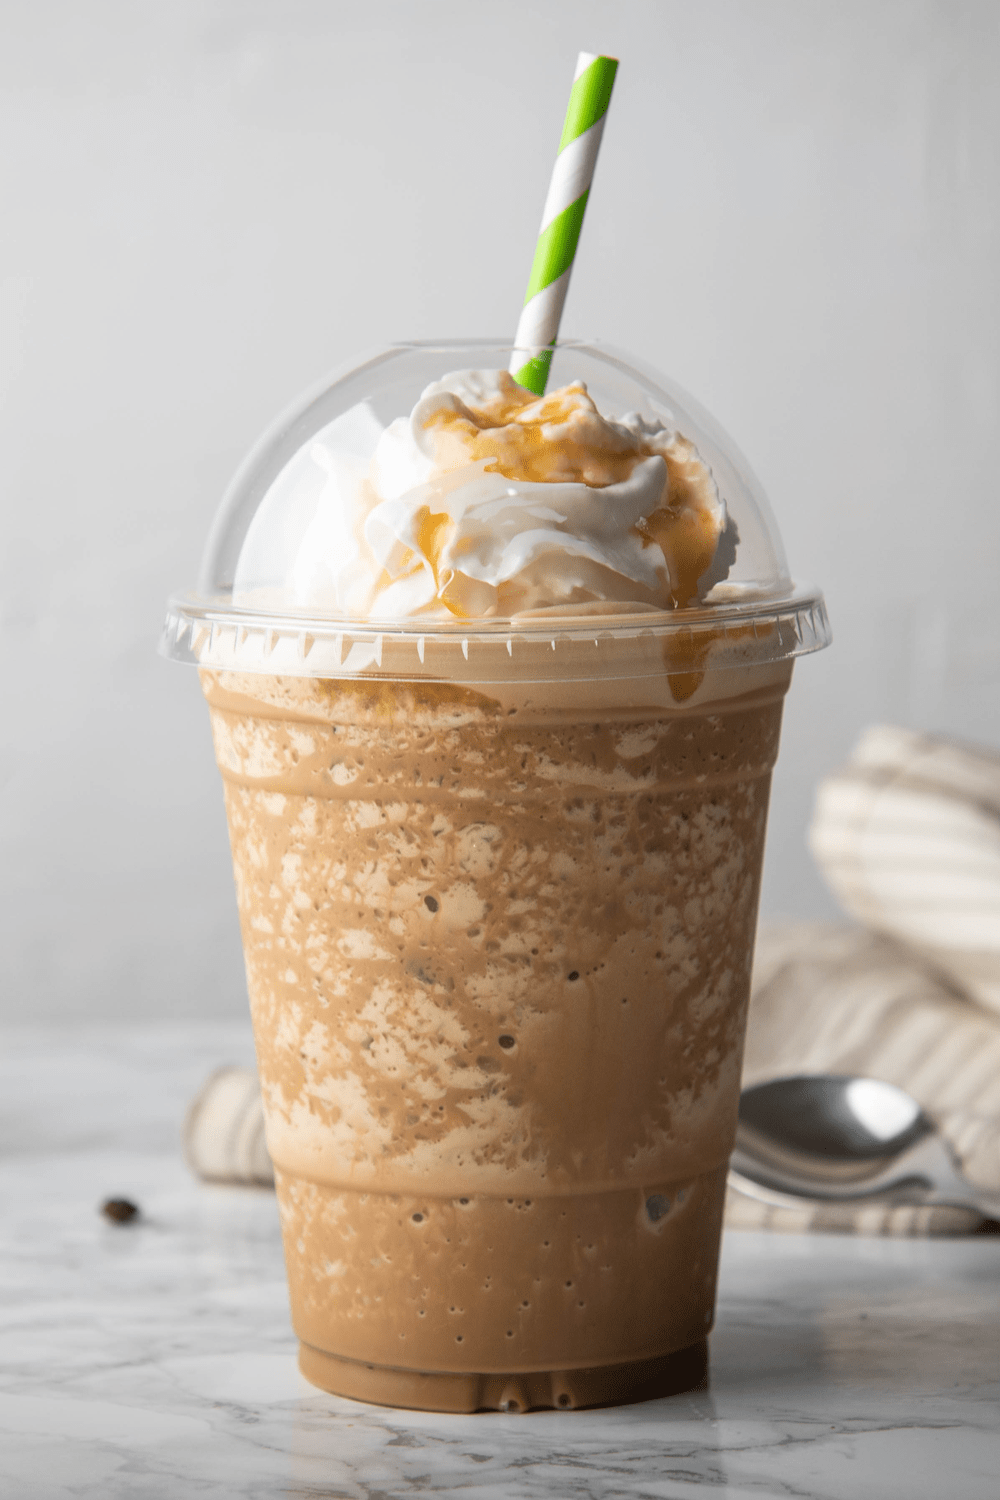 Starbucks Caramel Frappe with Whipped Cream